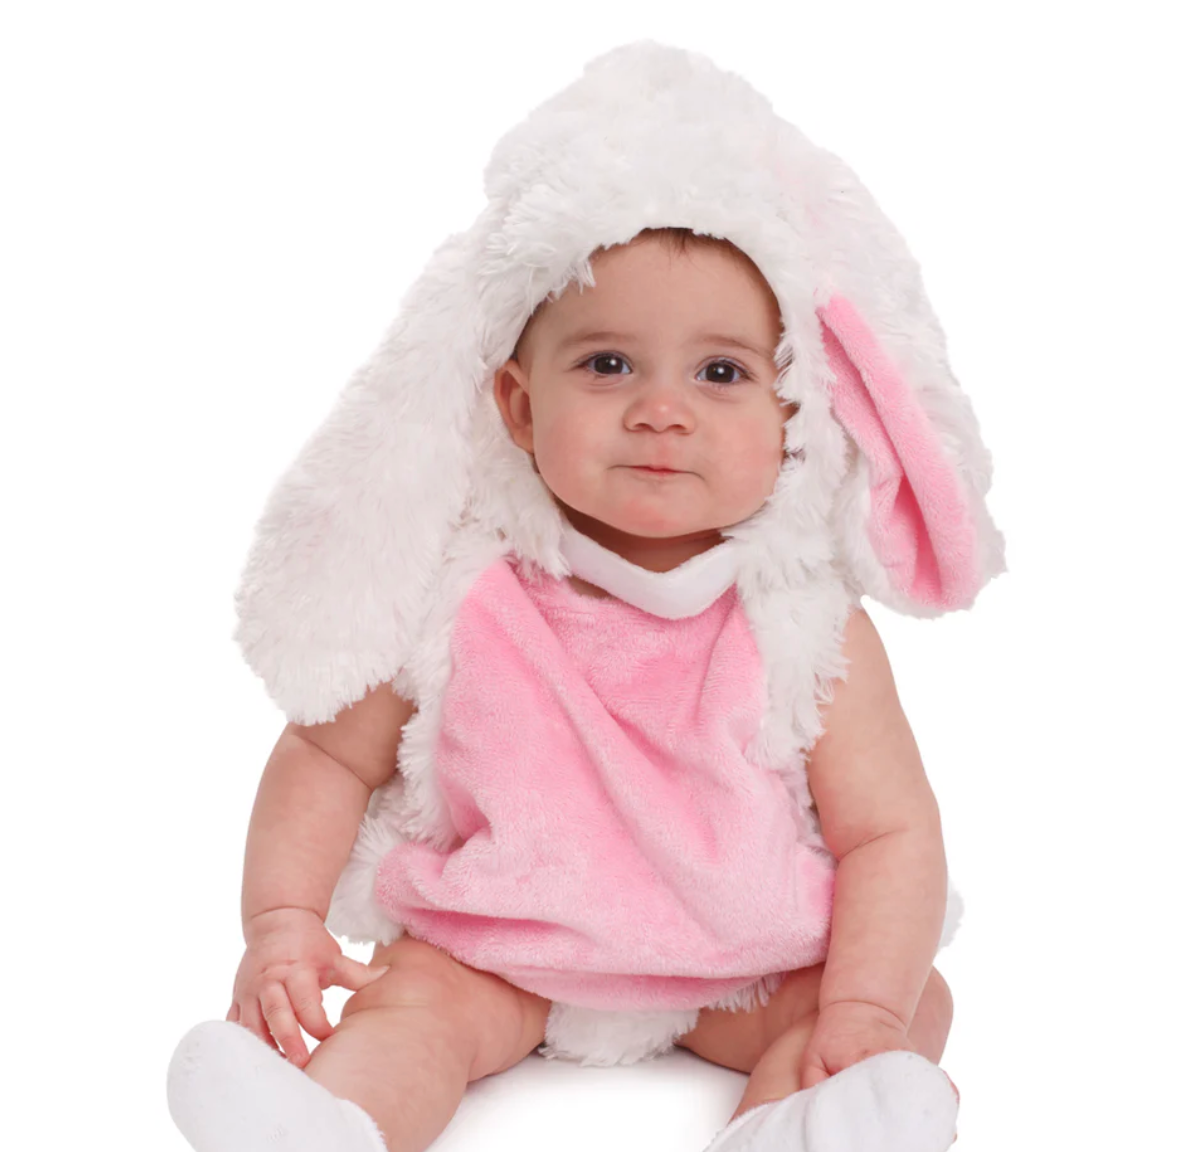 Hop into Fun with the Plush Pink & White Bunny Costume